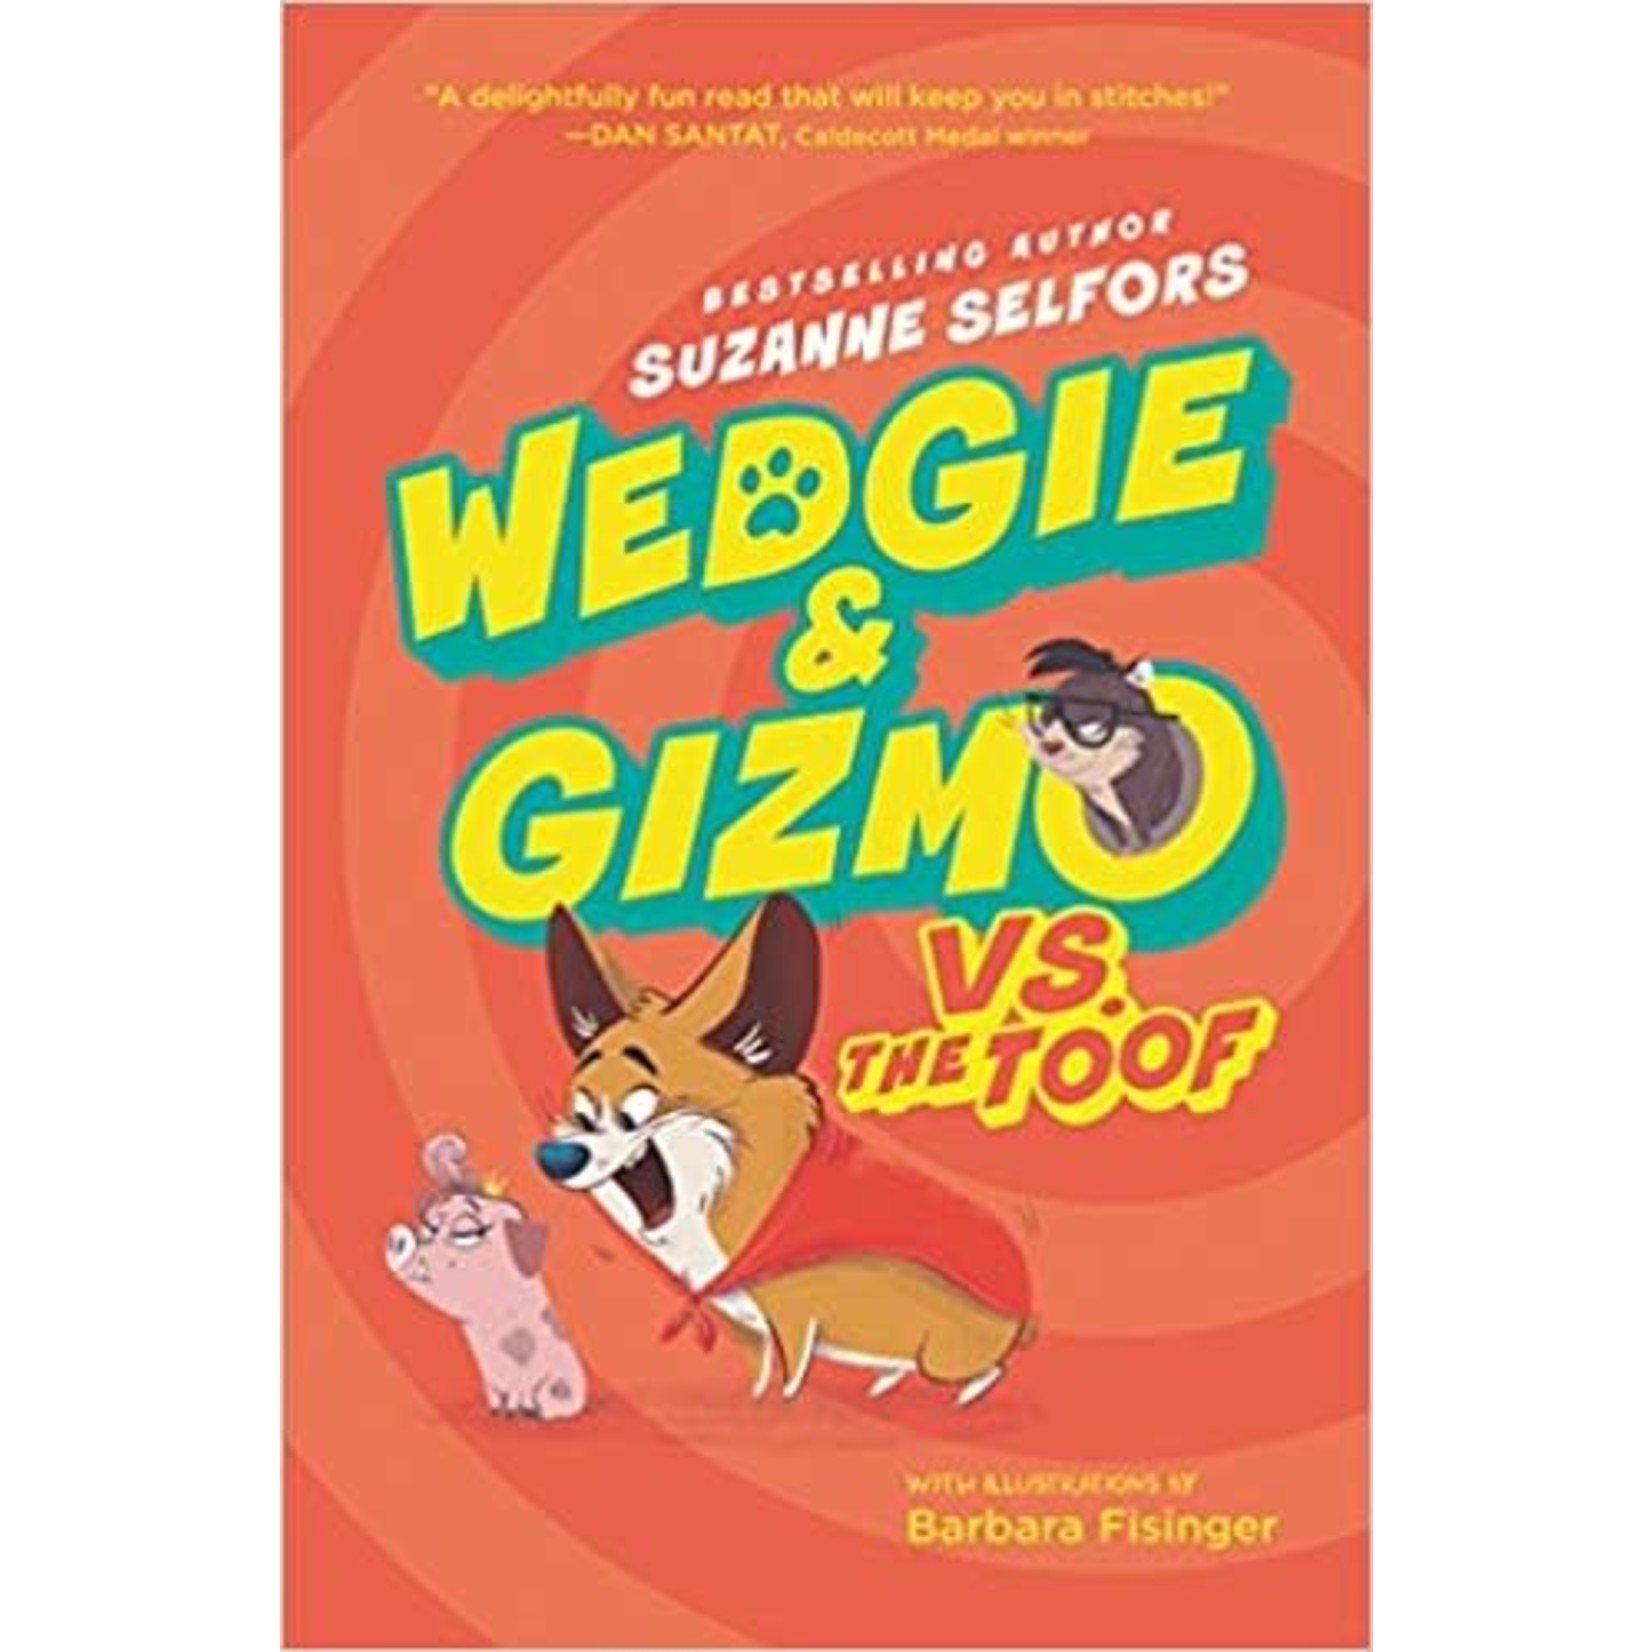 Suzanne Selfors Wedgie and Gizmo vs The Toof